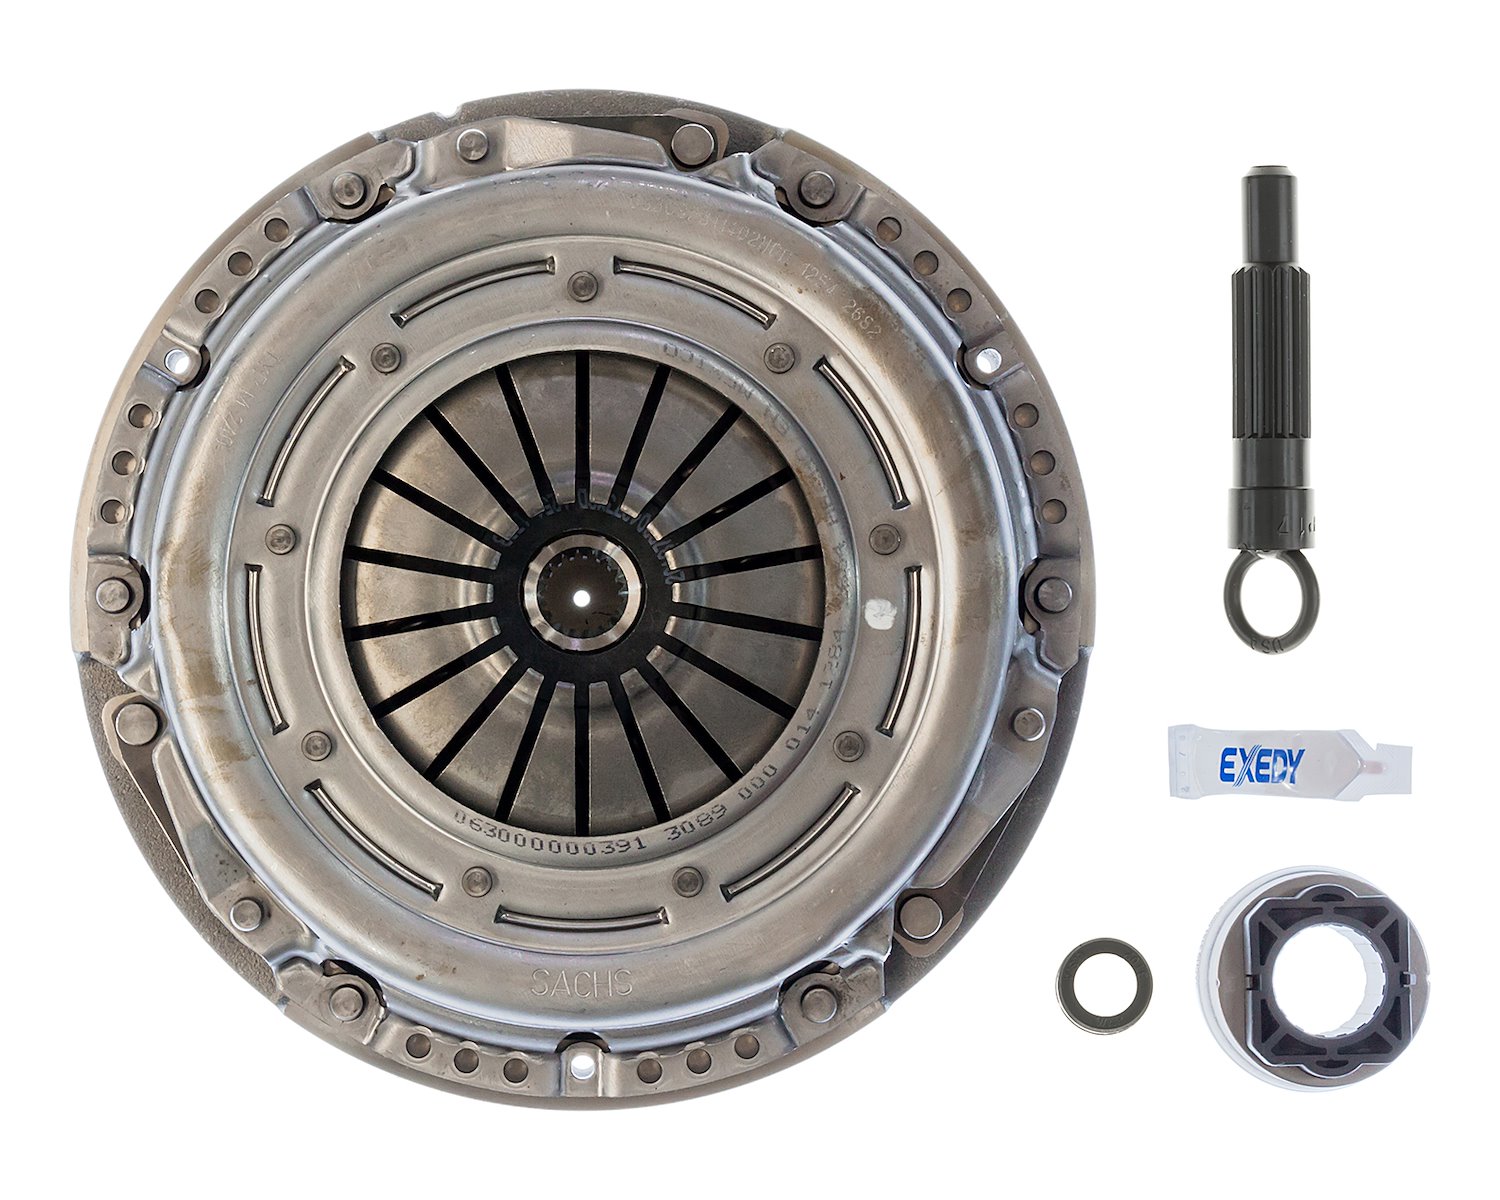 CRK1001 OEM Replacement Transmission Clutch and Flywheel Kit,